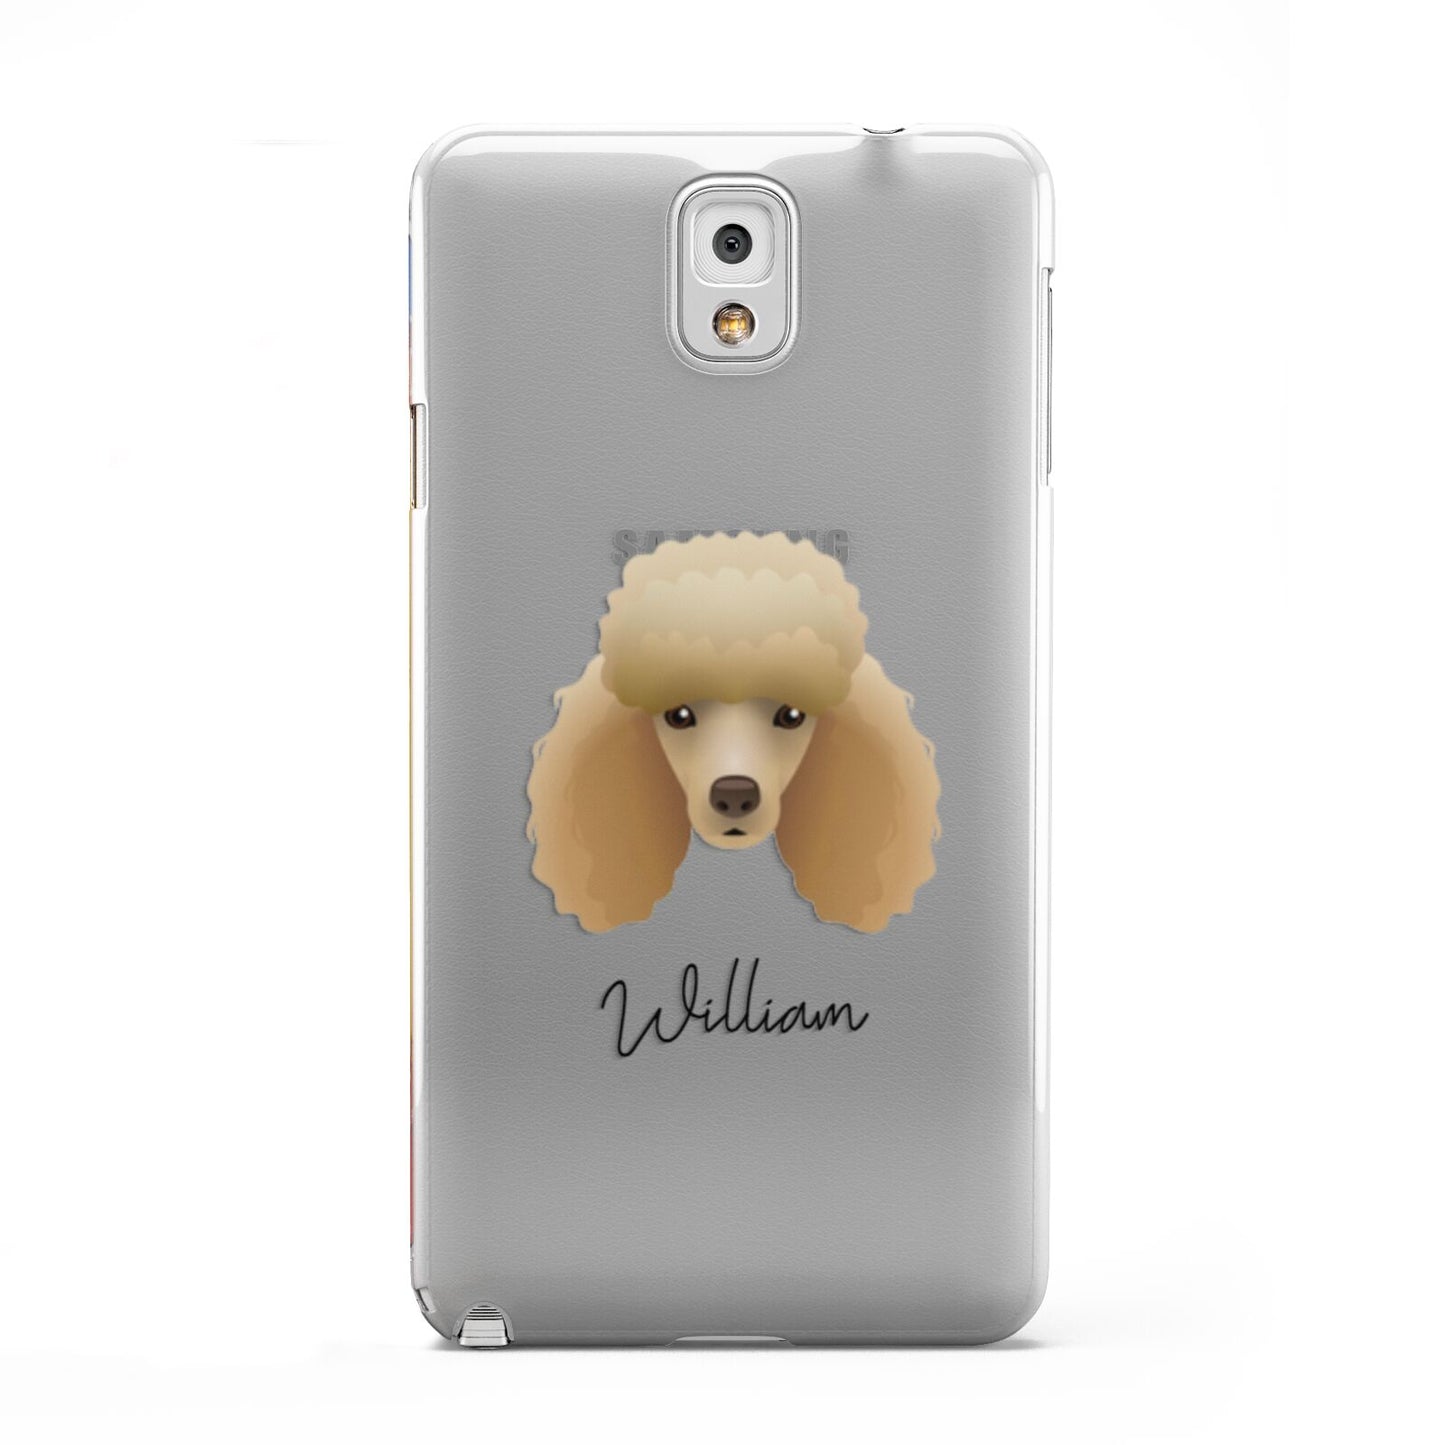 Miniature Poodle Personalised Samsung Galaxy Note 3 Case